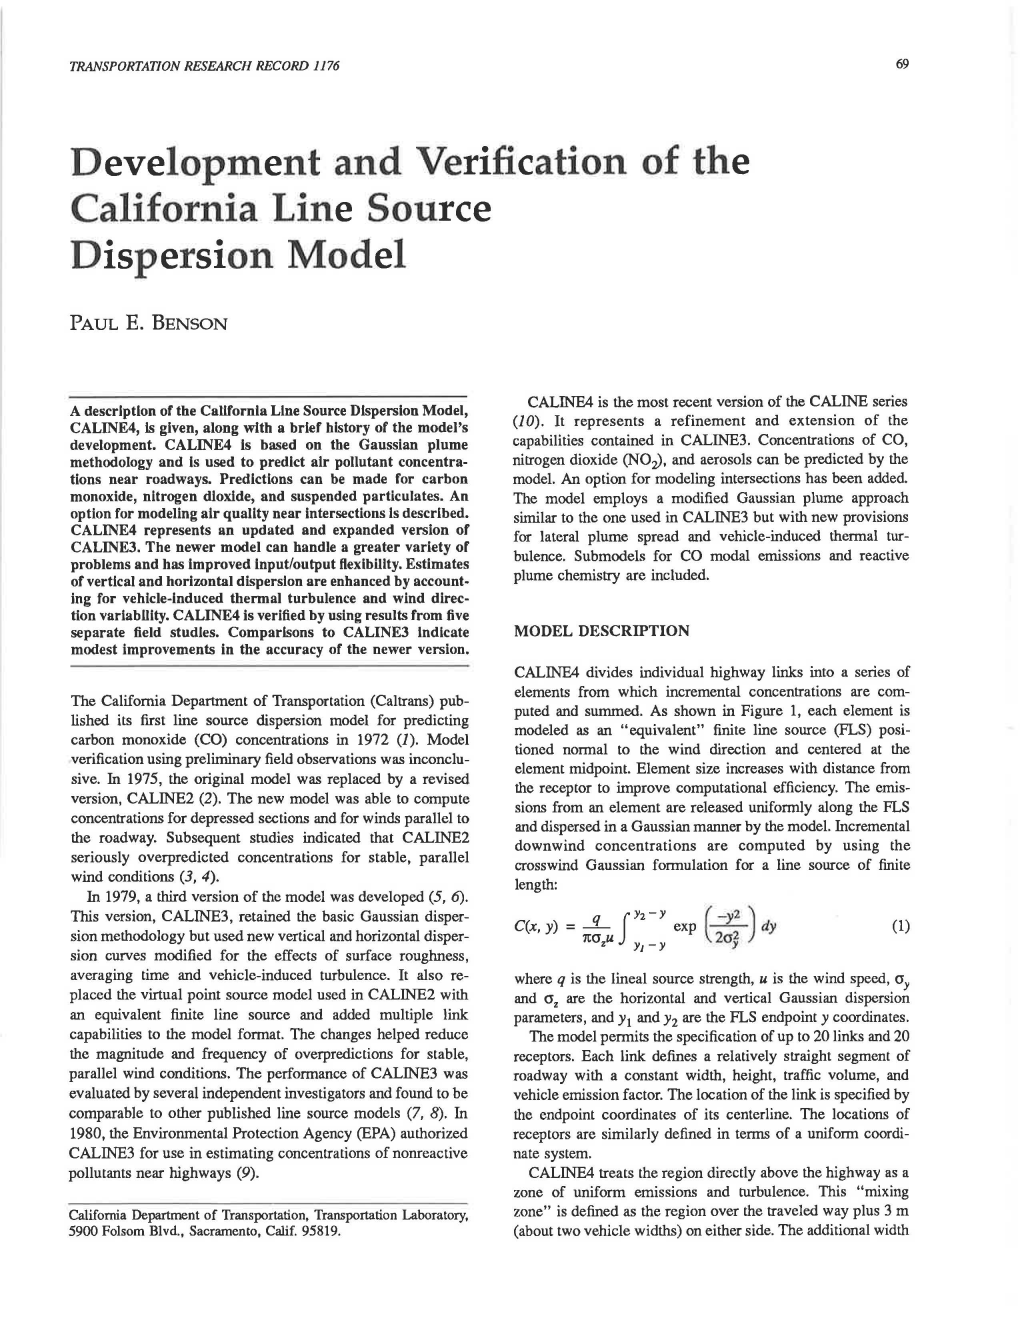 Development and Verification of the California Line Source Dispersion Model